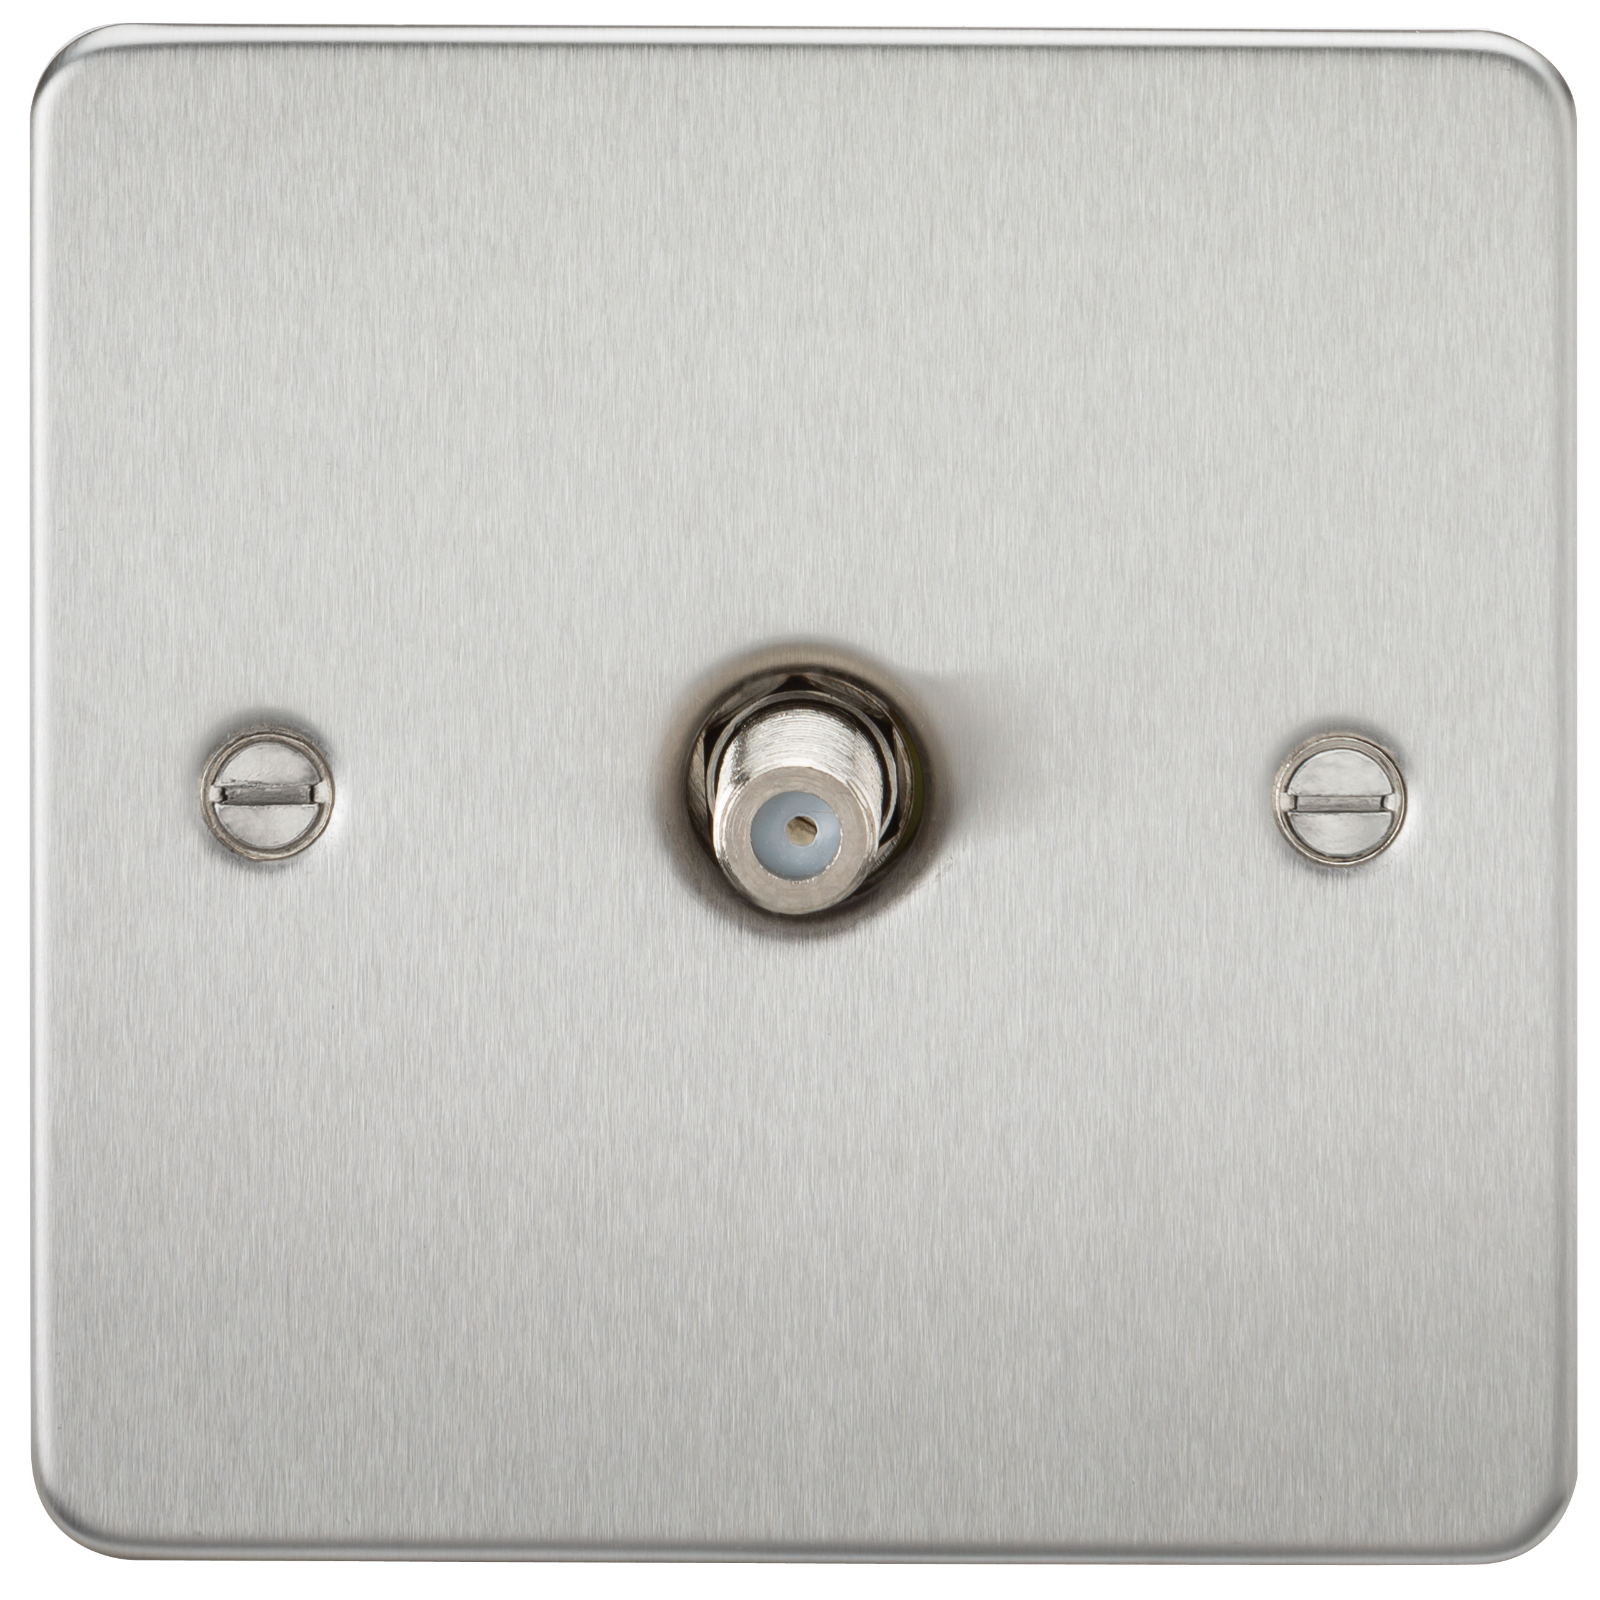 Flat Plate 1G SAT TV Outlet (non-isolated) - Brushed Chrome - FP0150BC 